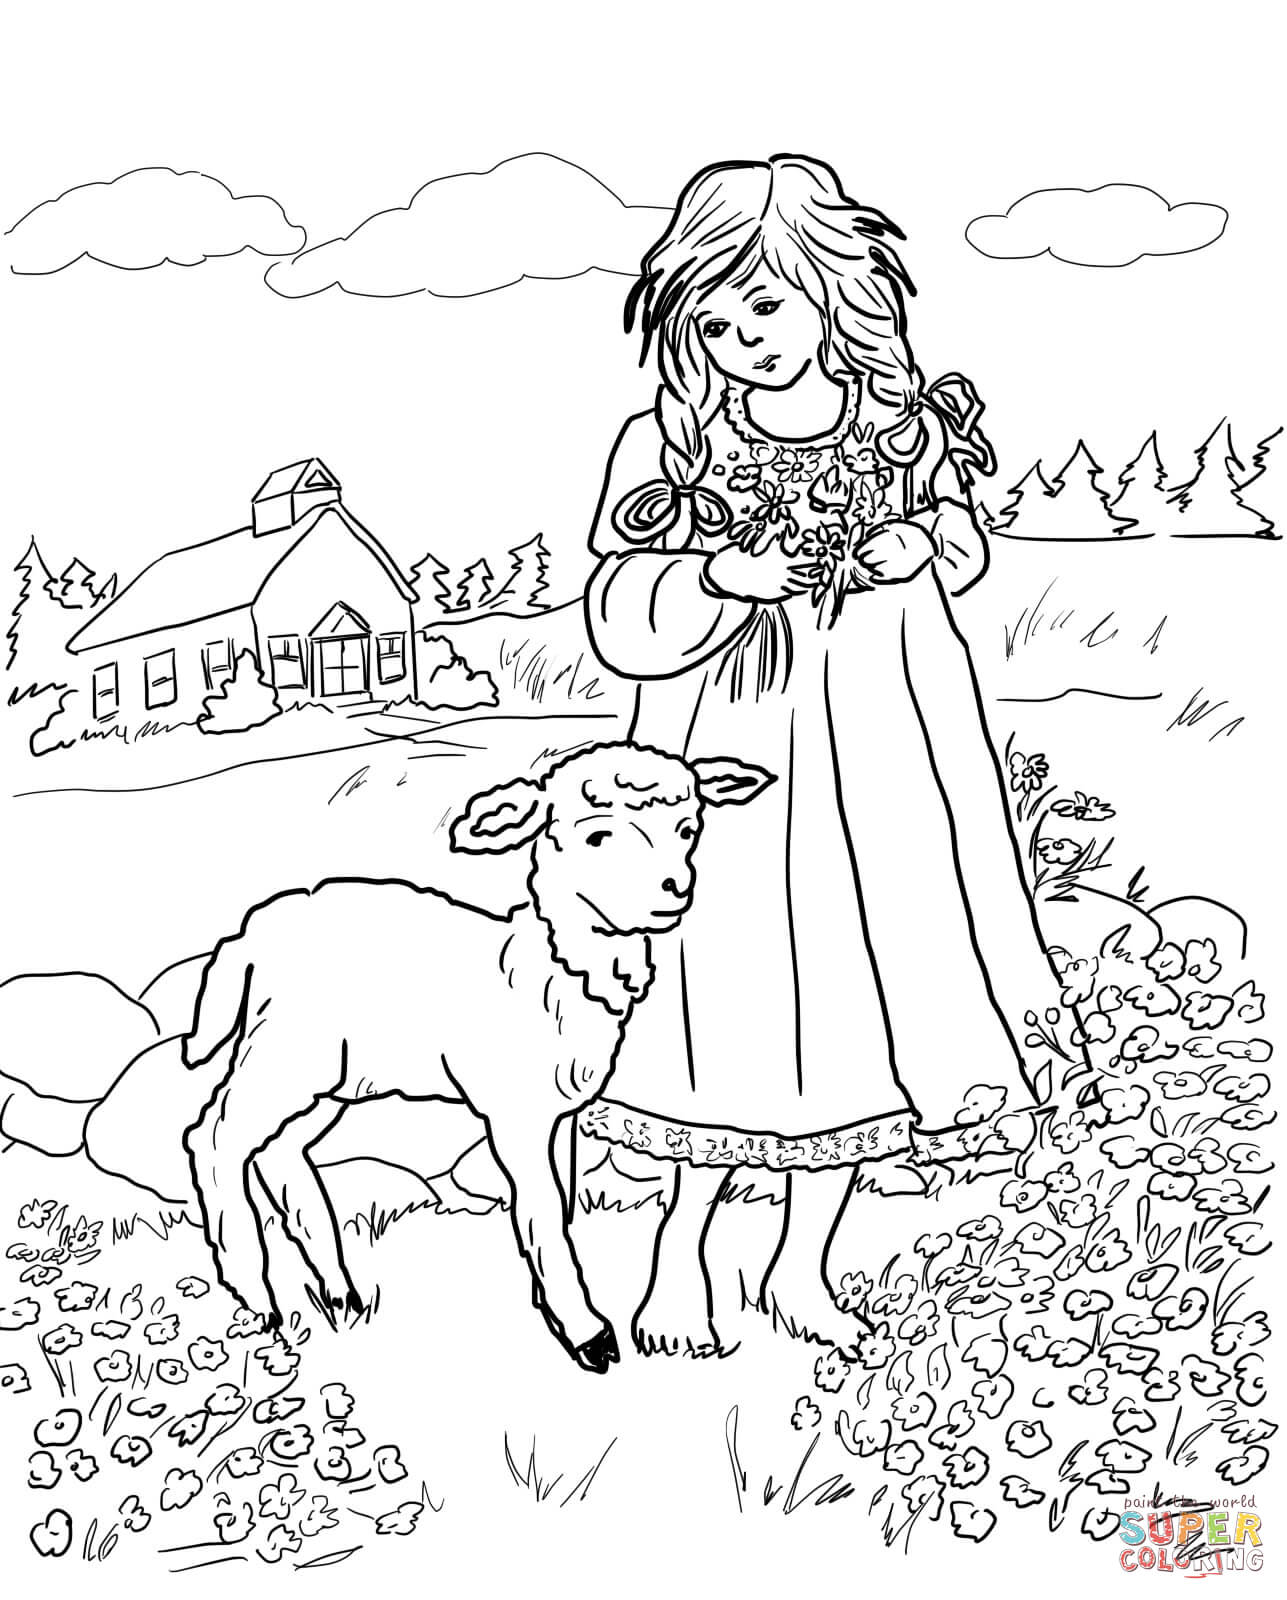 Mary with a Little Lamb coloring page | Free Printable Coloring Pages